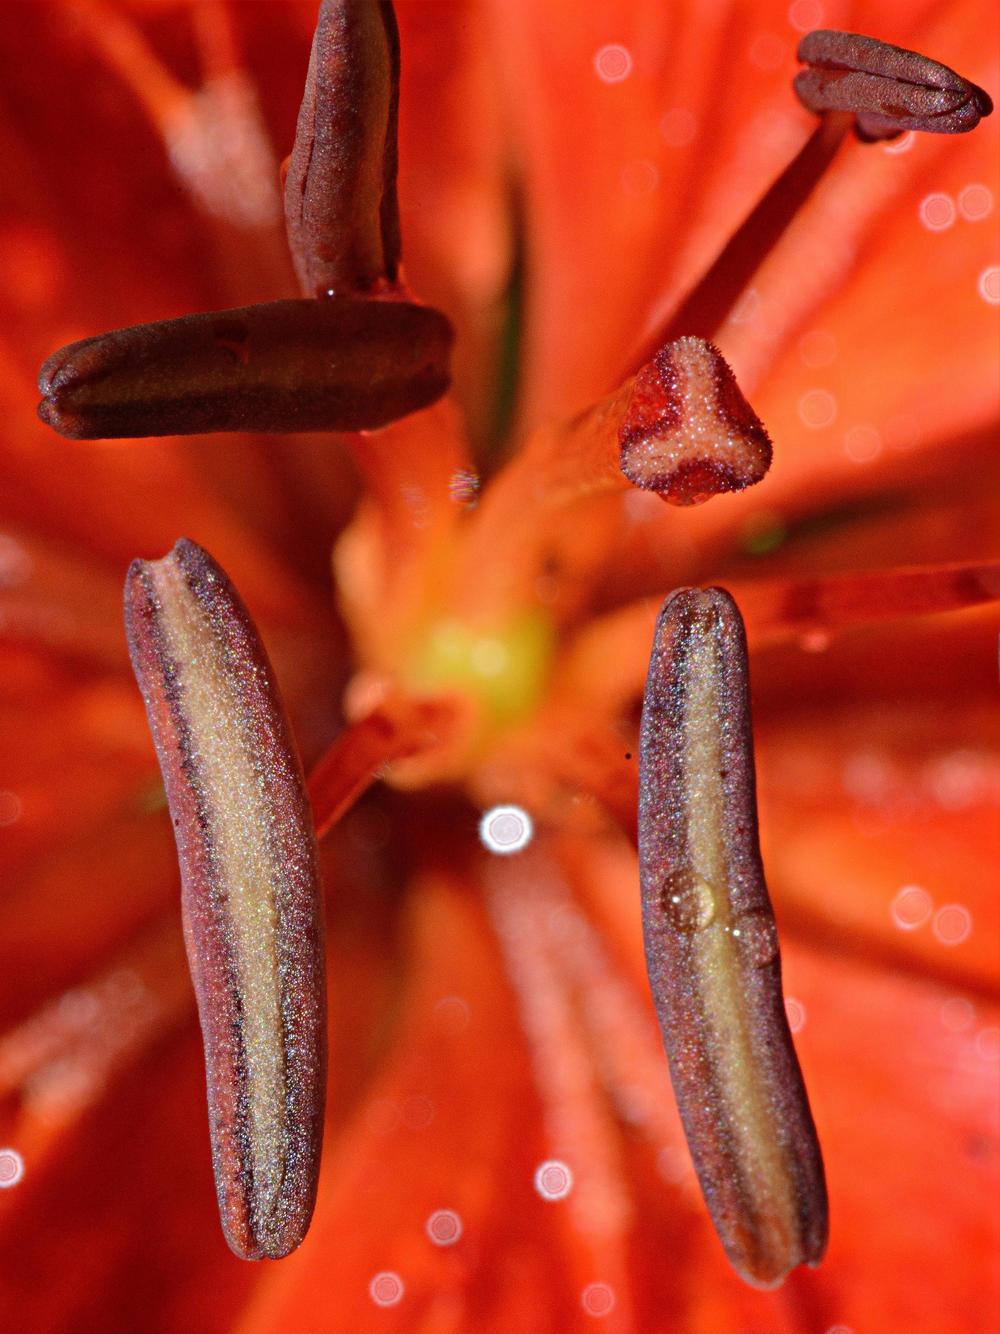 Photo of Lily (Lilium 'Crimson Pixie') uploaded by marsrover